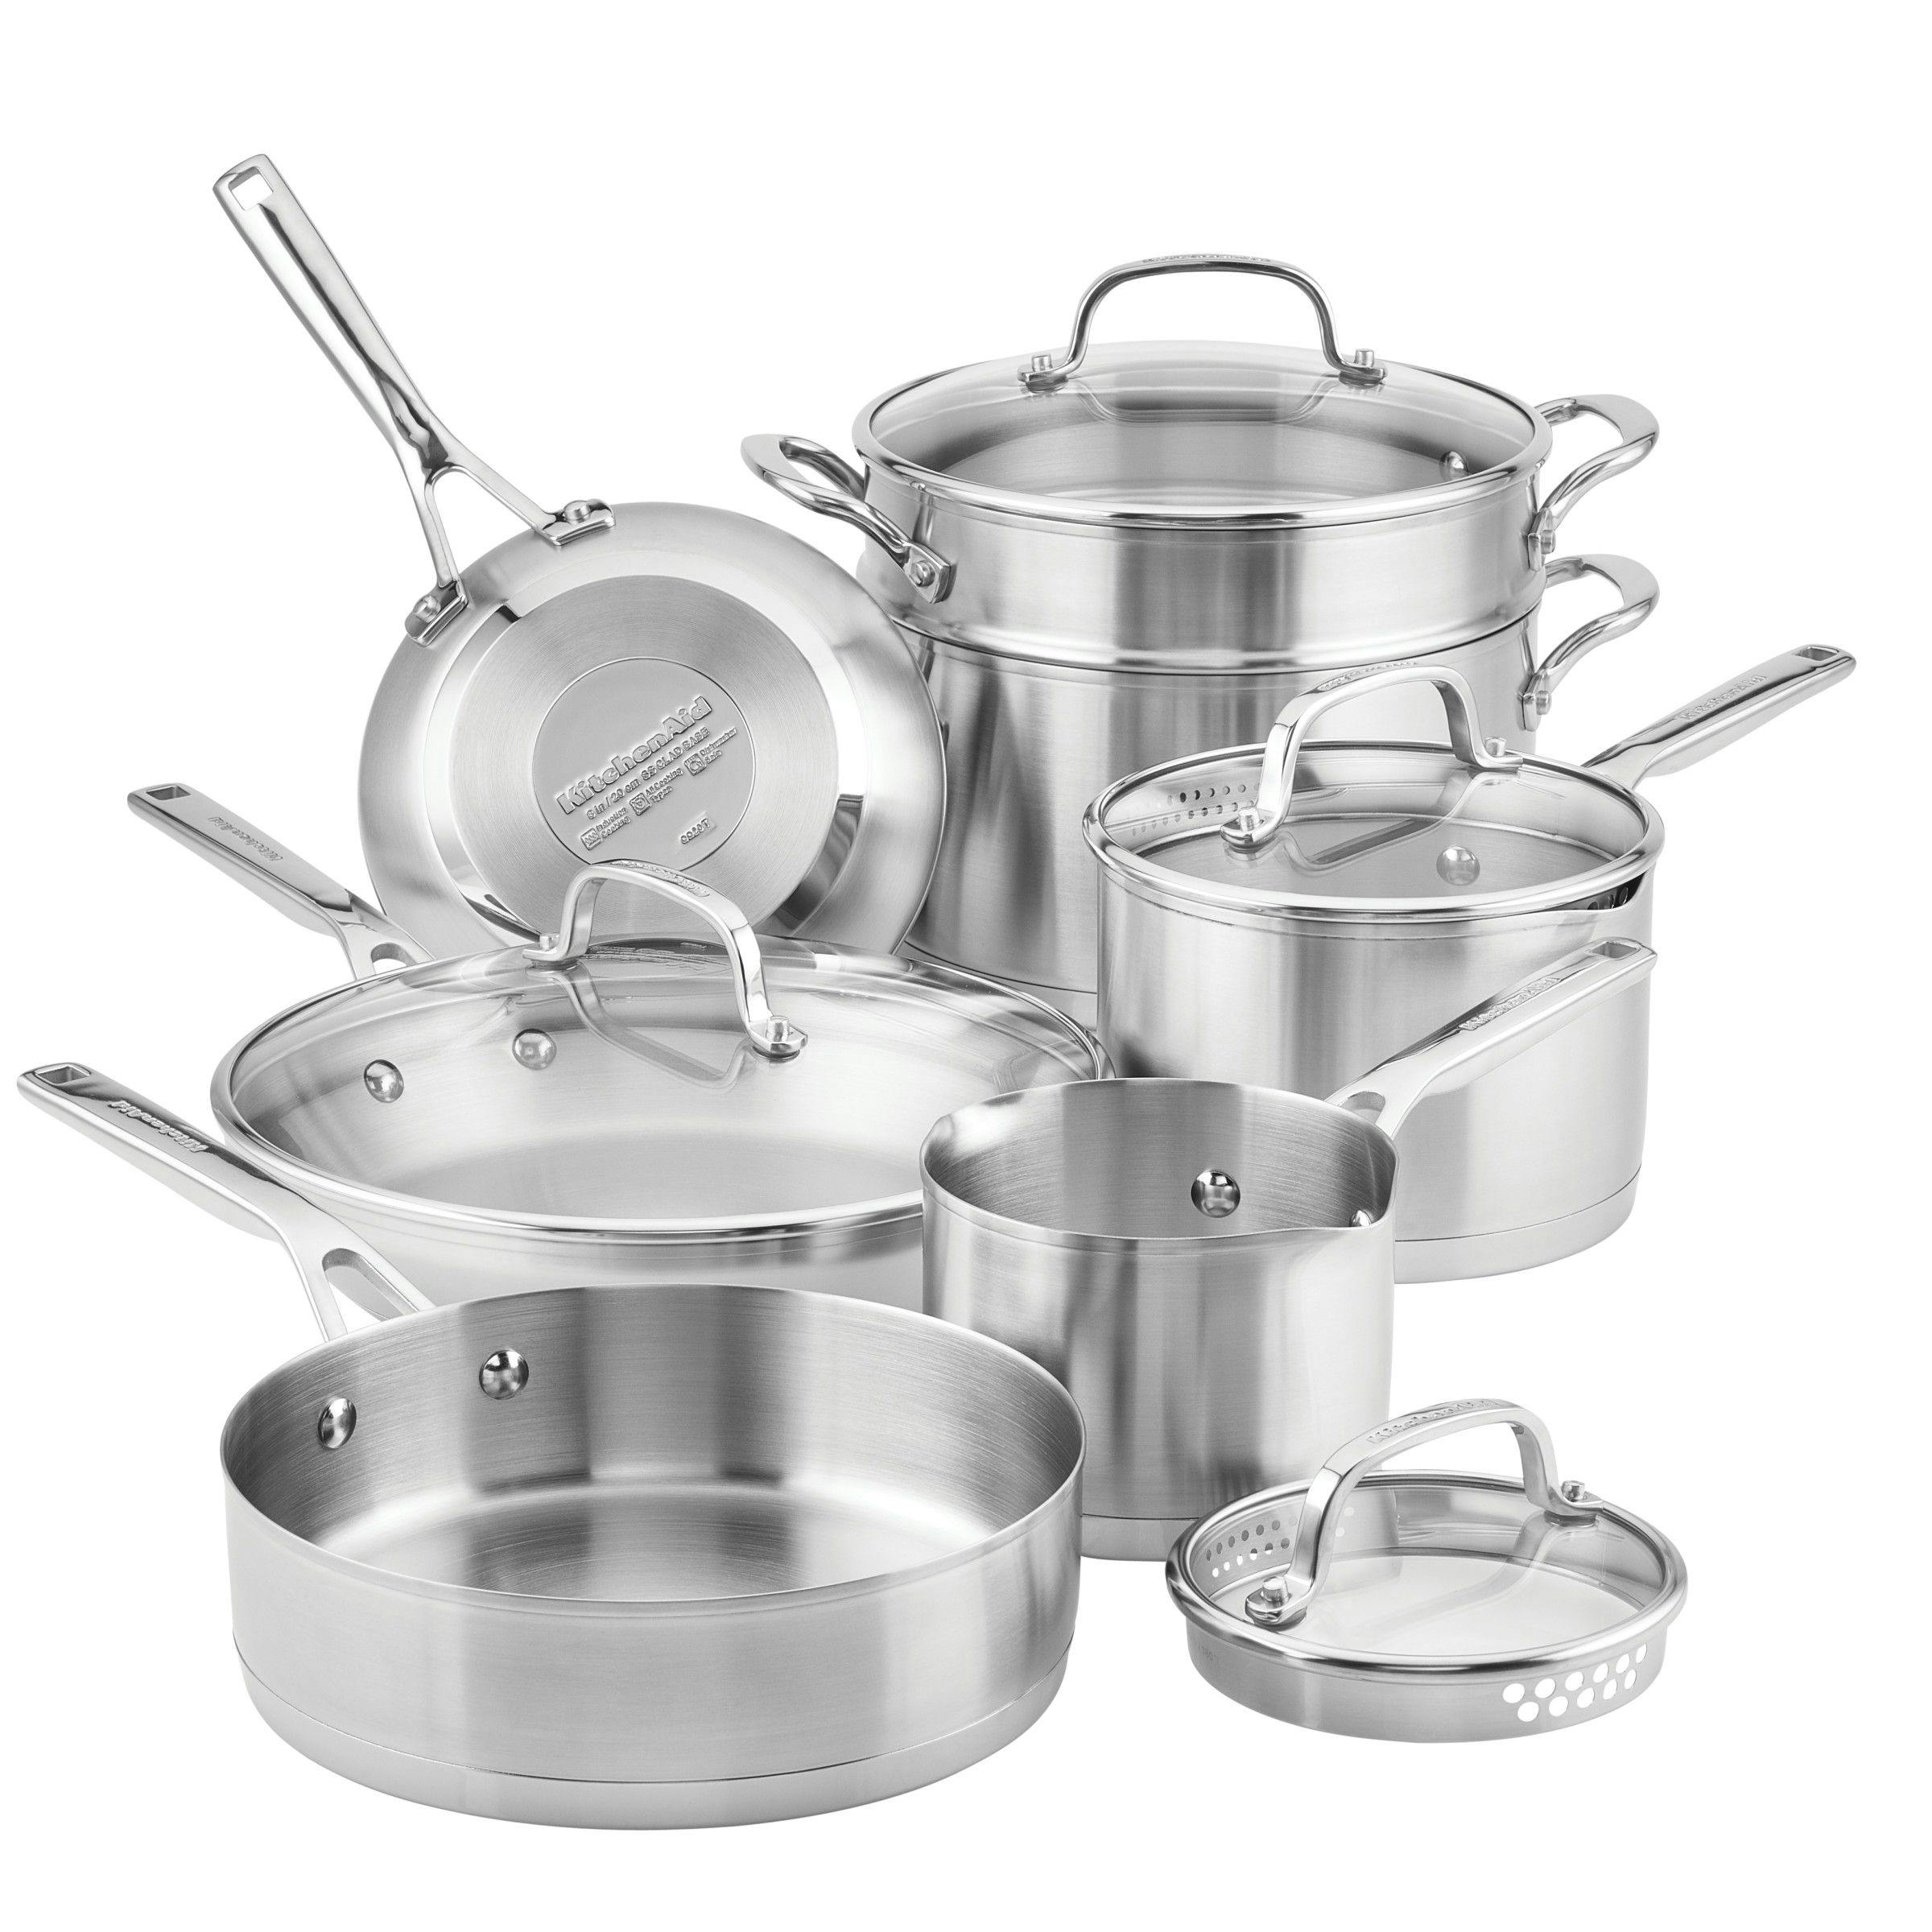 KitchenAid 3-Ply Base Stainless Steel Cookware Induction Pots and Pans Set, 11-Piece, Brushed Stainless Steel